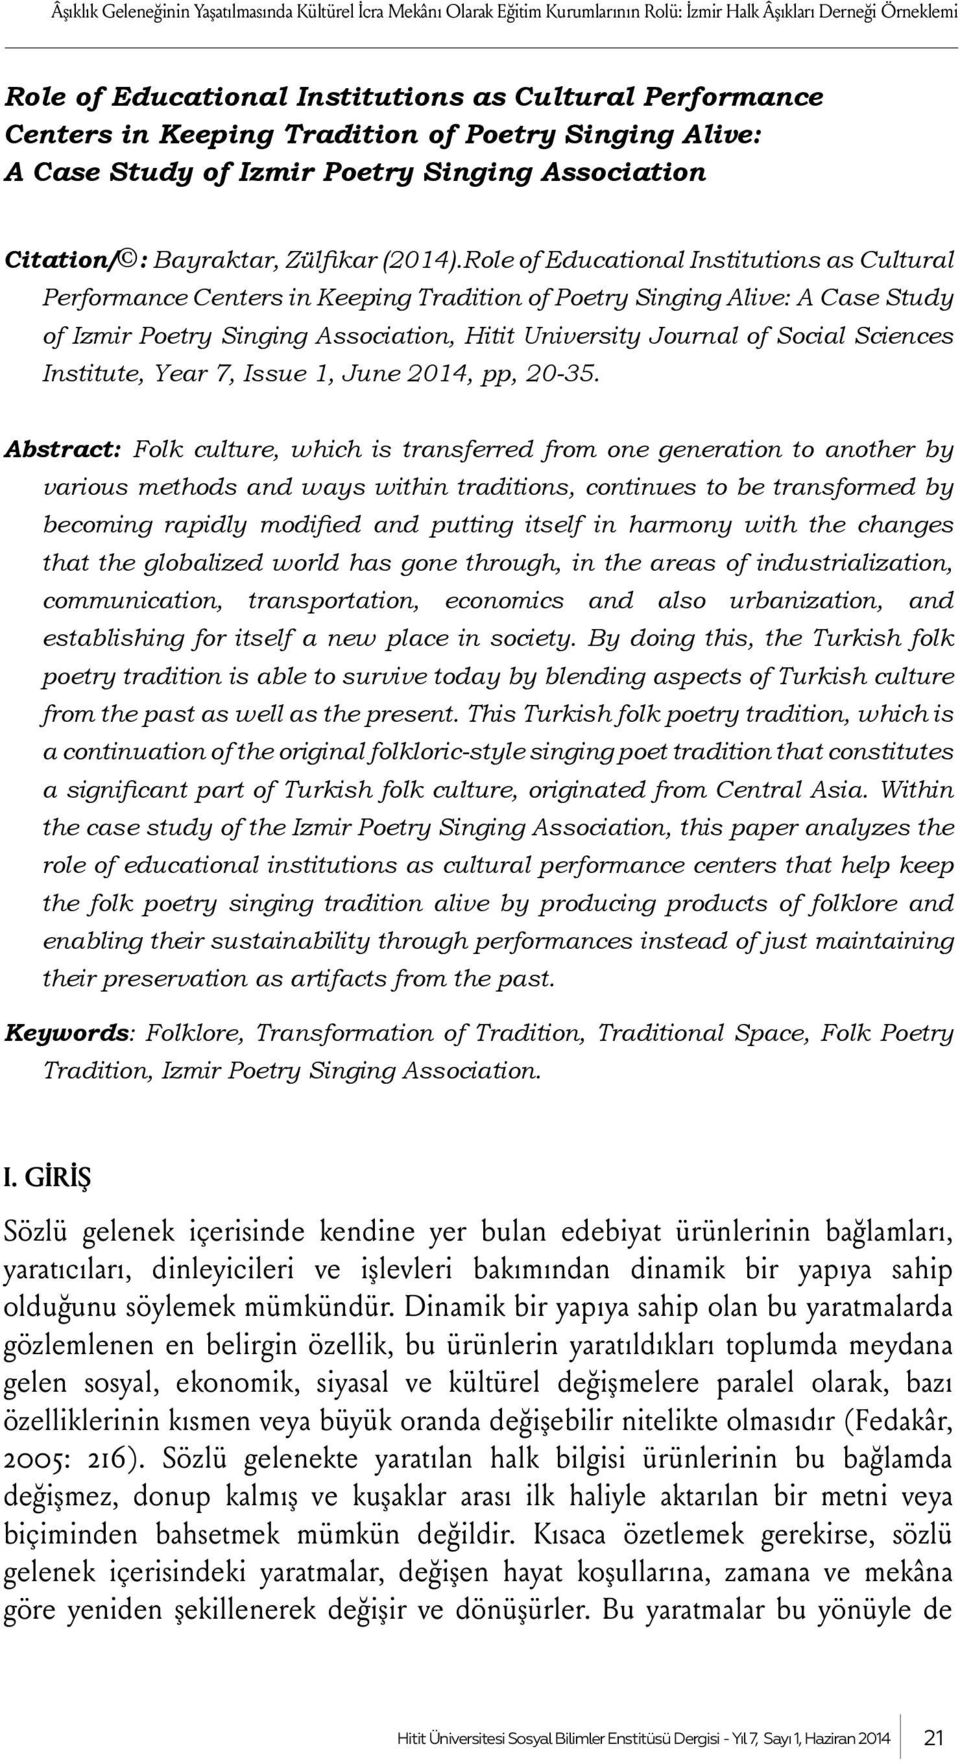 Role of Educational Institutions as Cultural Performance Centers in Keeping Tradition of Poetry Singing Alive: A Case Study of Izmir Poetry Singing Association, Hitit University Journal of Social